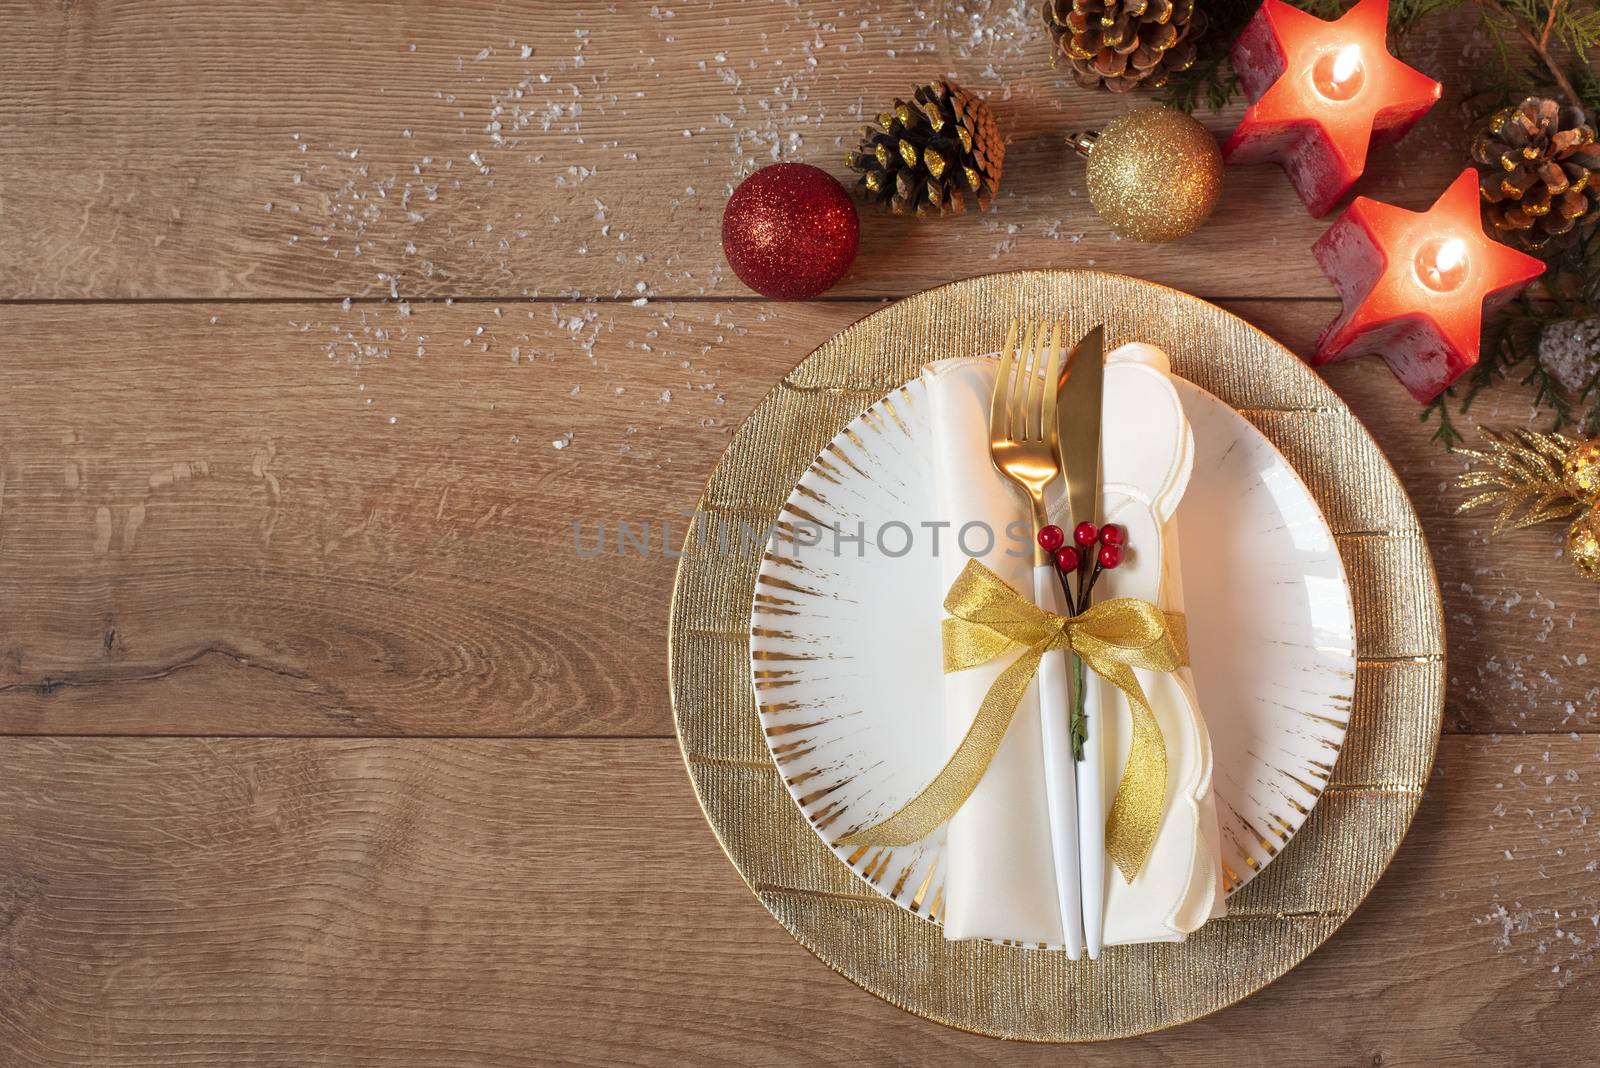 Christmas holiday dinner place setting - plates, napkin, cutlery, gold bauble decorations over oak table background. Fork and spoon on gold plates. Around red candles, cones and balls. Flat lay by sevda_stancheva